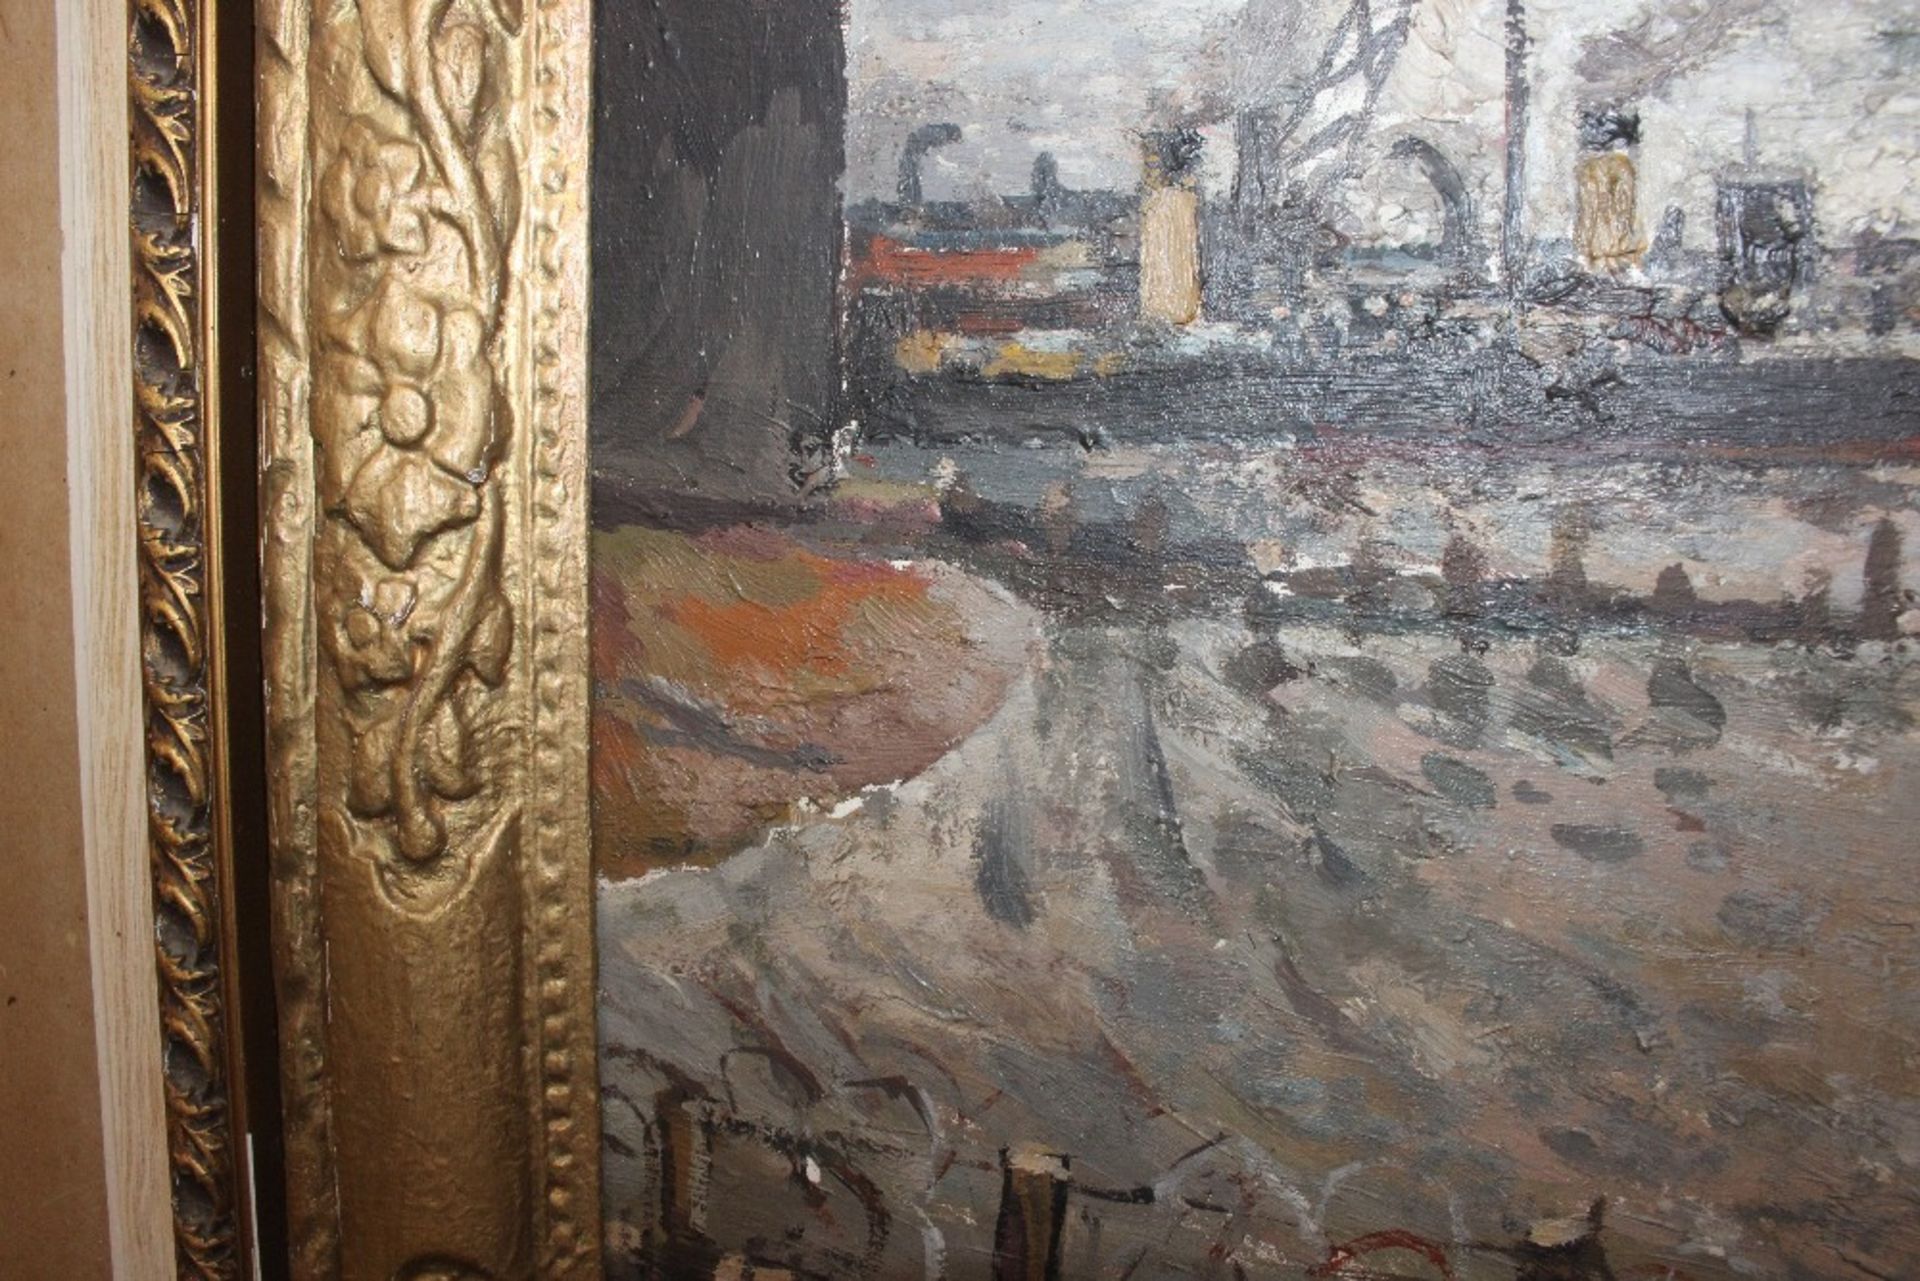 Allan Walton 1891-1948, study of a busy naval port with vessels and sailors, signed oil on canvas, - Image 14 of 15